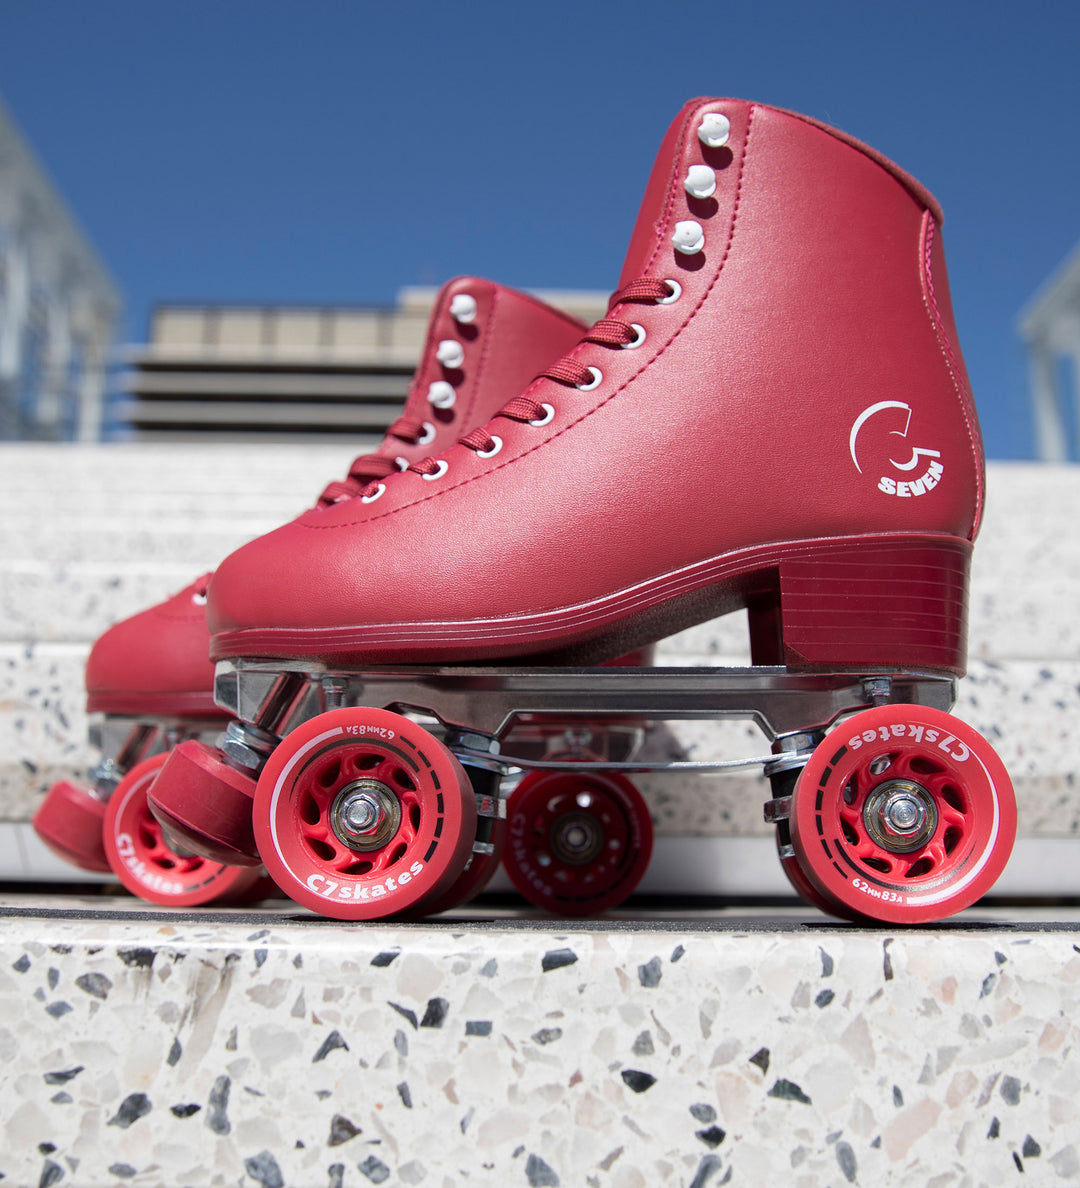 Cherrypop Quad Skates are dark red monochrome roller skates with removable toe stops, 62mm 83A wheels and a structured boot. 